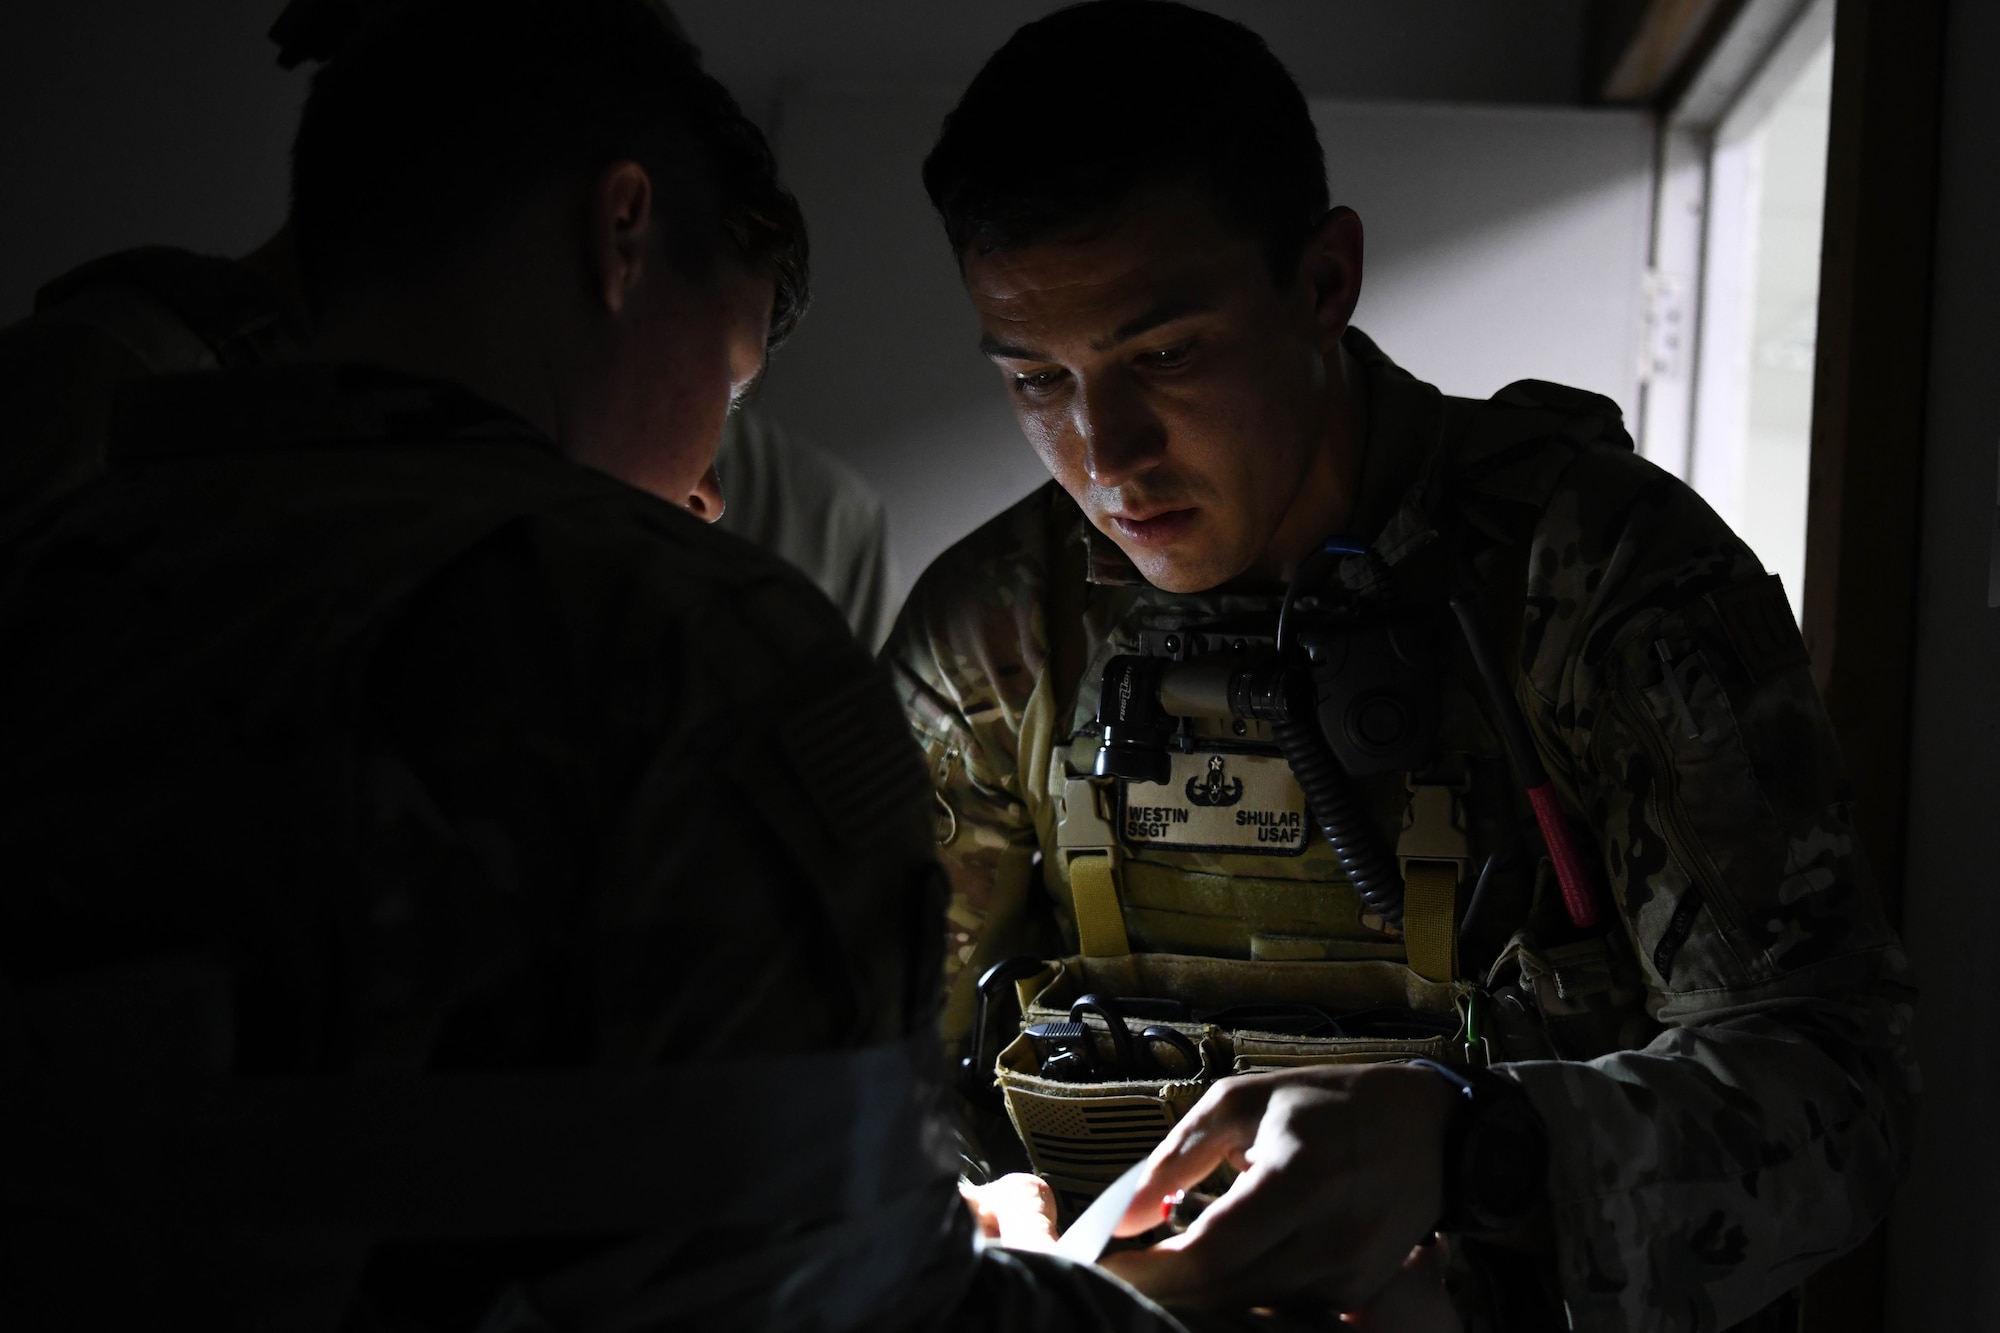 The intent of the joint agency exercise was to evaluate emergency responders with no advance notice, in order to identify shortfalls in training, communication, or assets, to ensure the 380th Air Expeditionary Wing is ready for real-world situations.